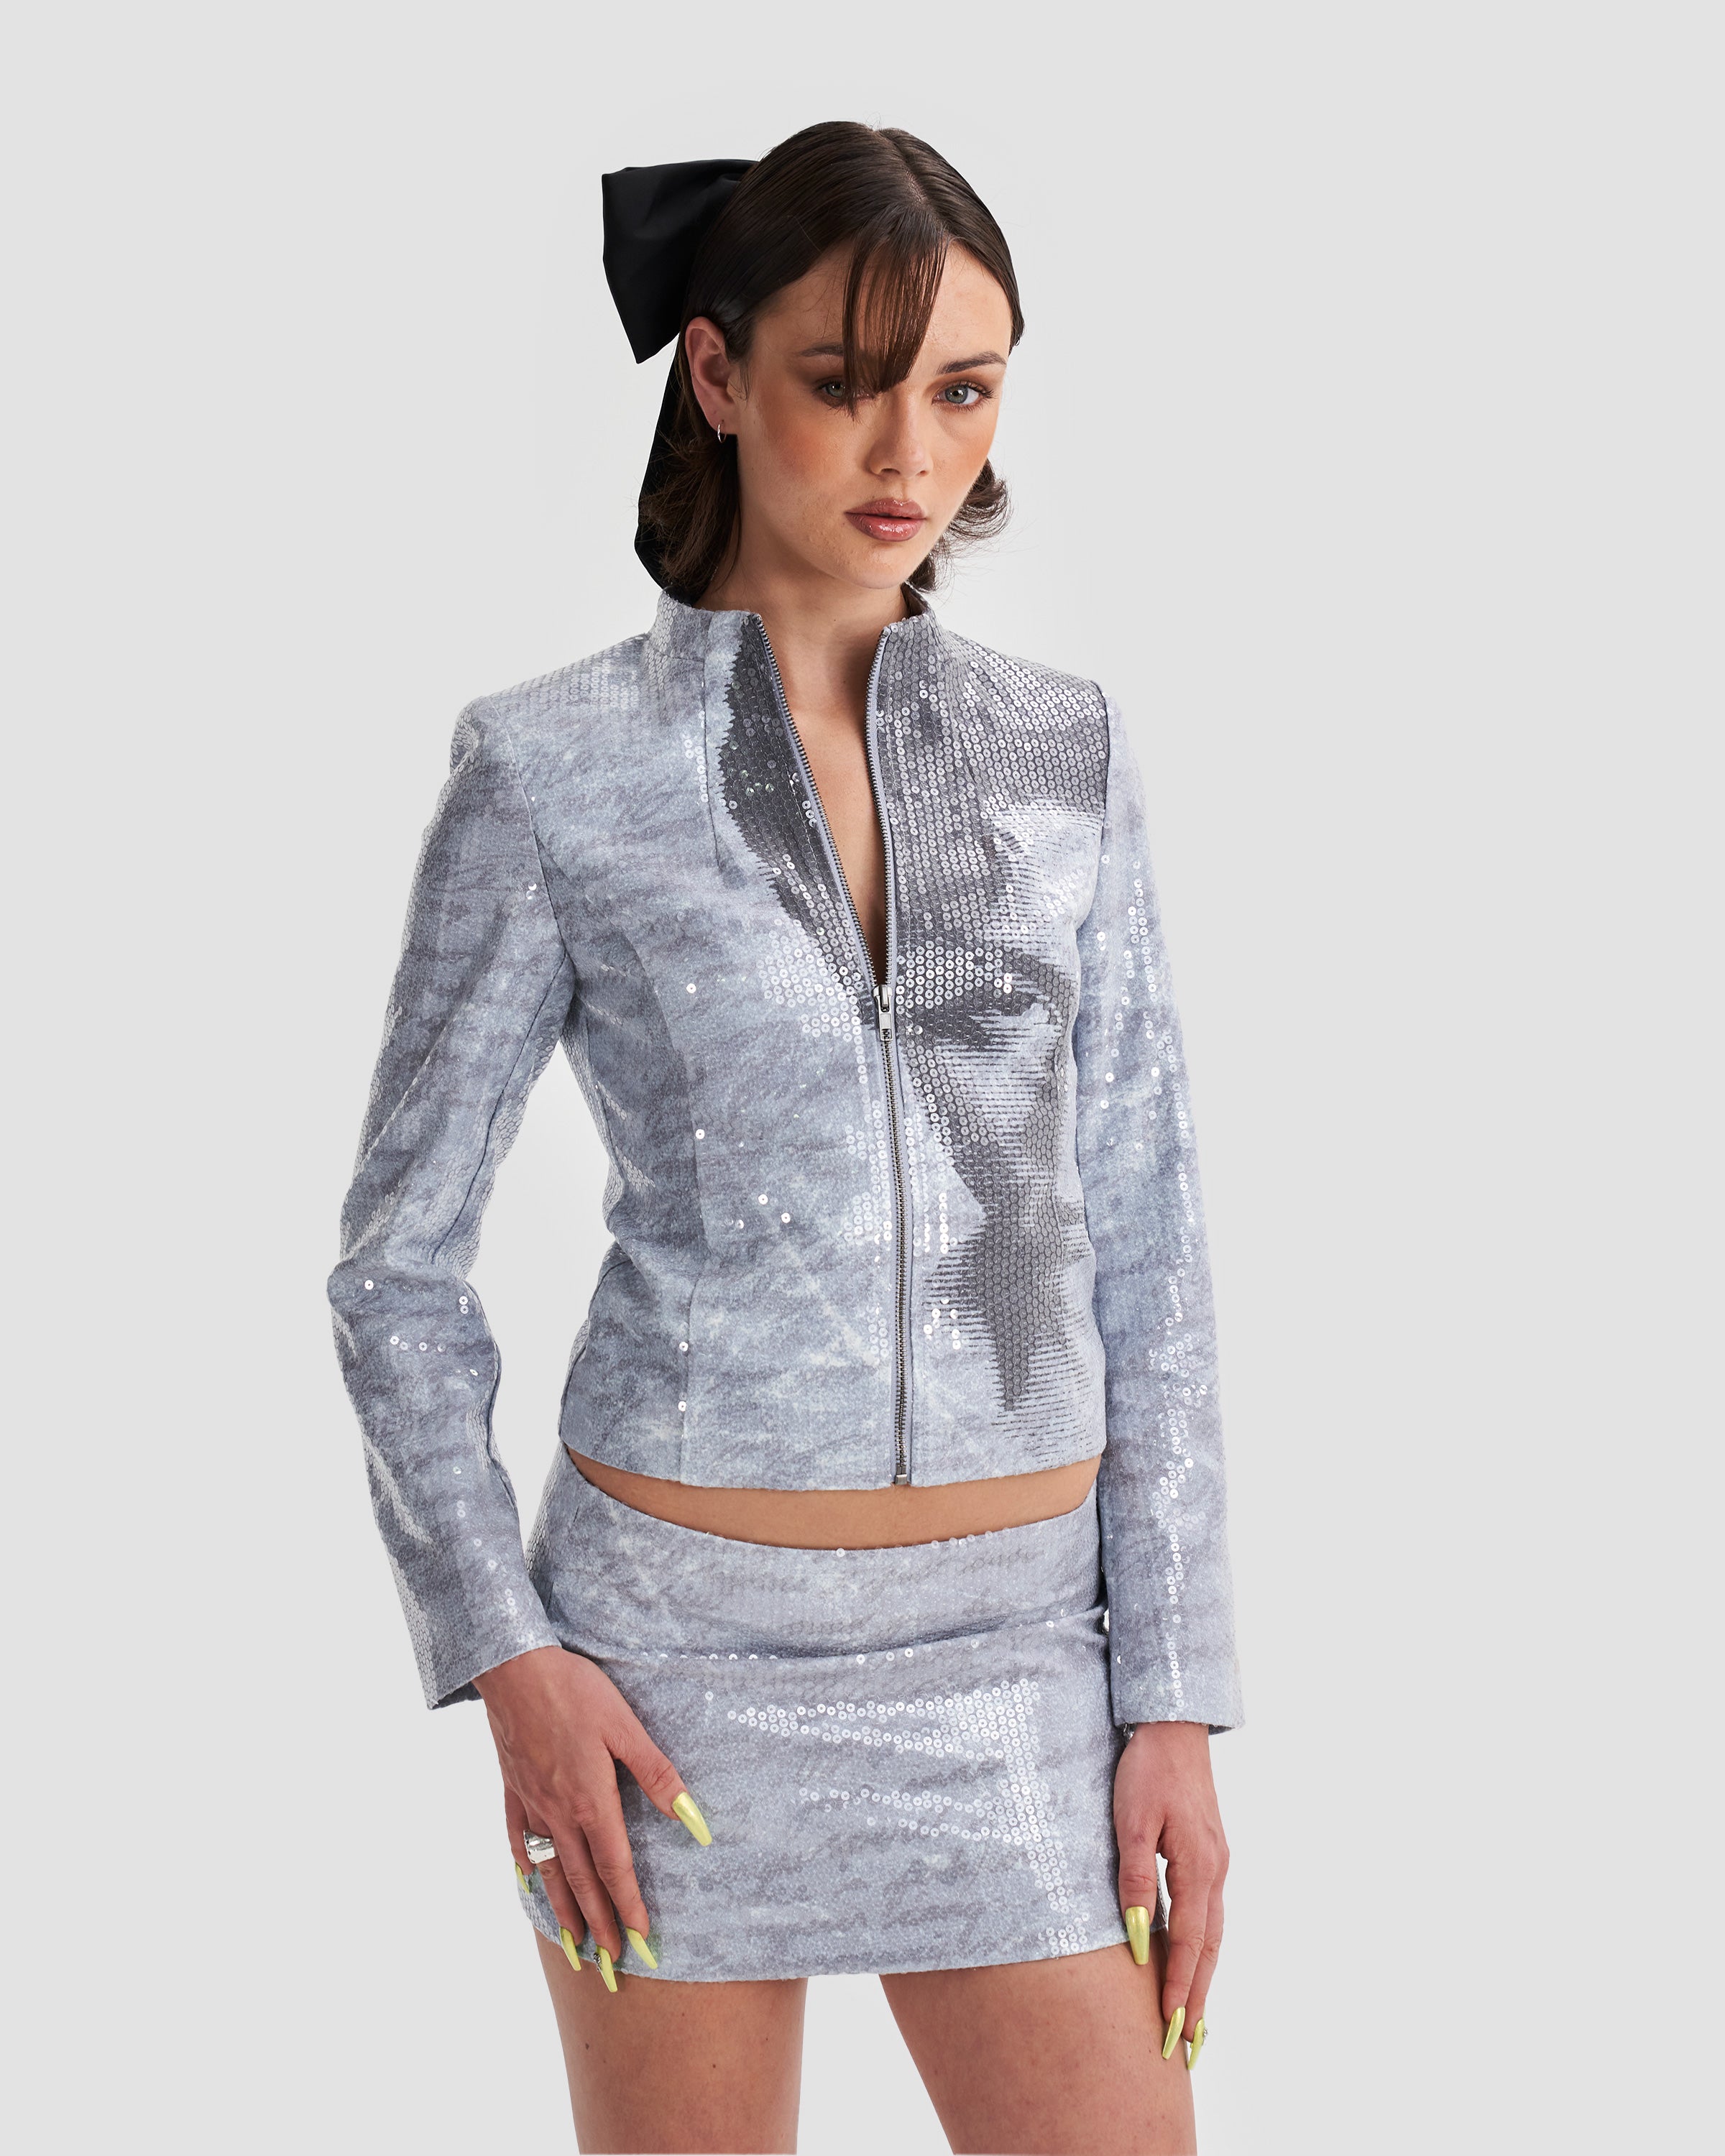 Sequin Structured Zip Up Jacket Co-Ord with Print in Silver